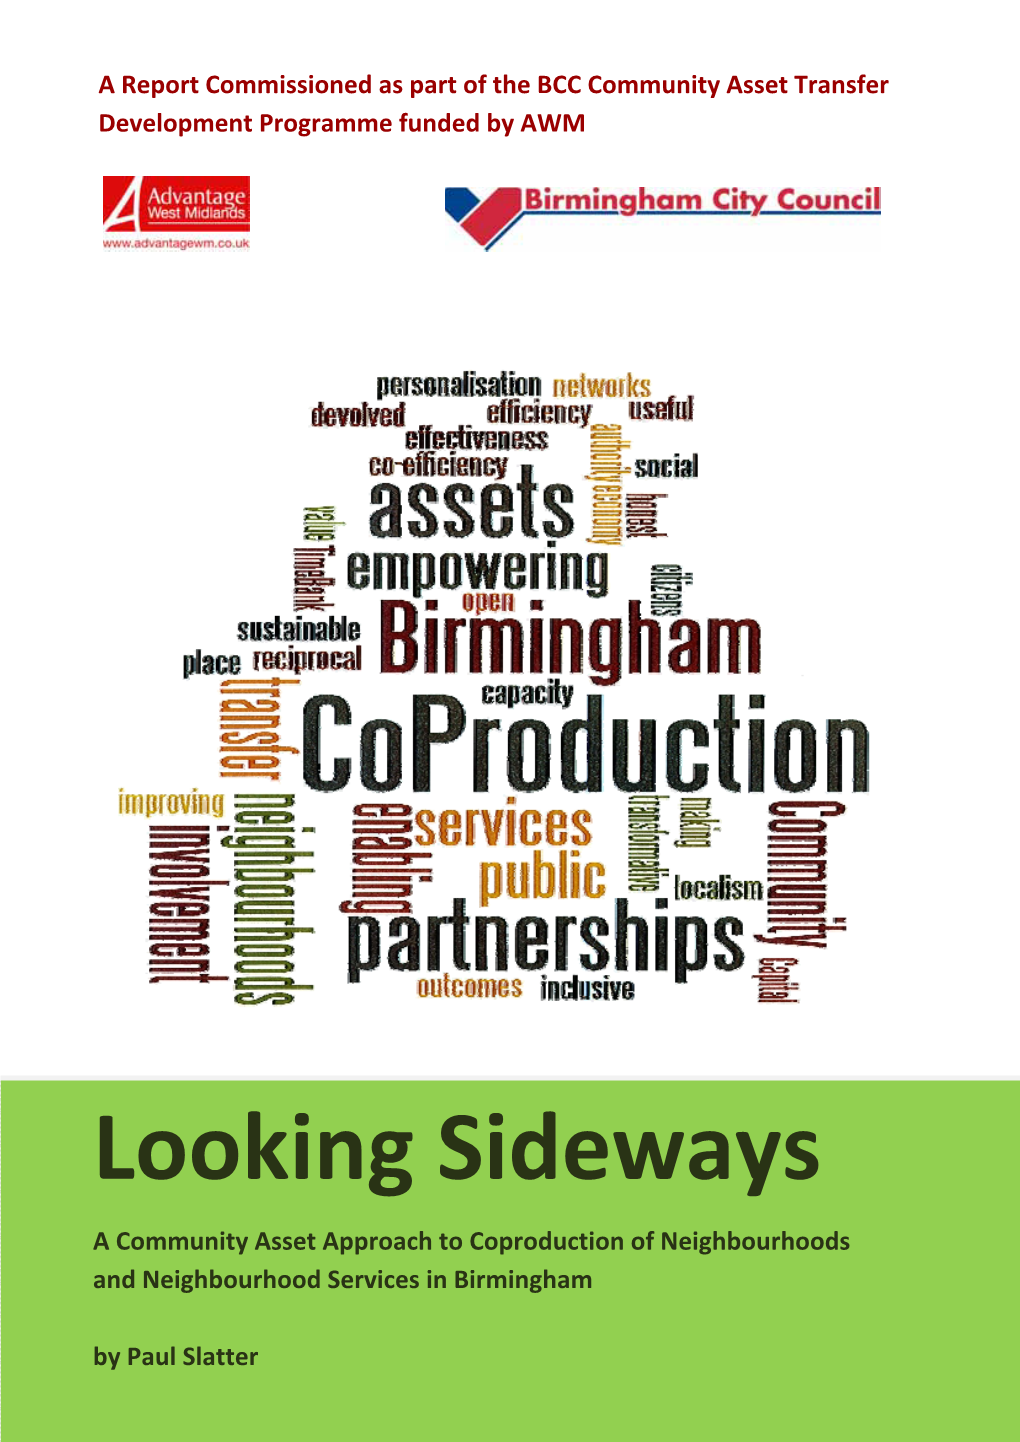 Looking Sideways a Community Asset Approach to Coproduction of Neighbourhoods and Neighbourhood Services in Birmingham by Paul Slatter